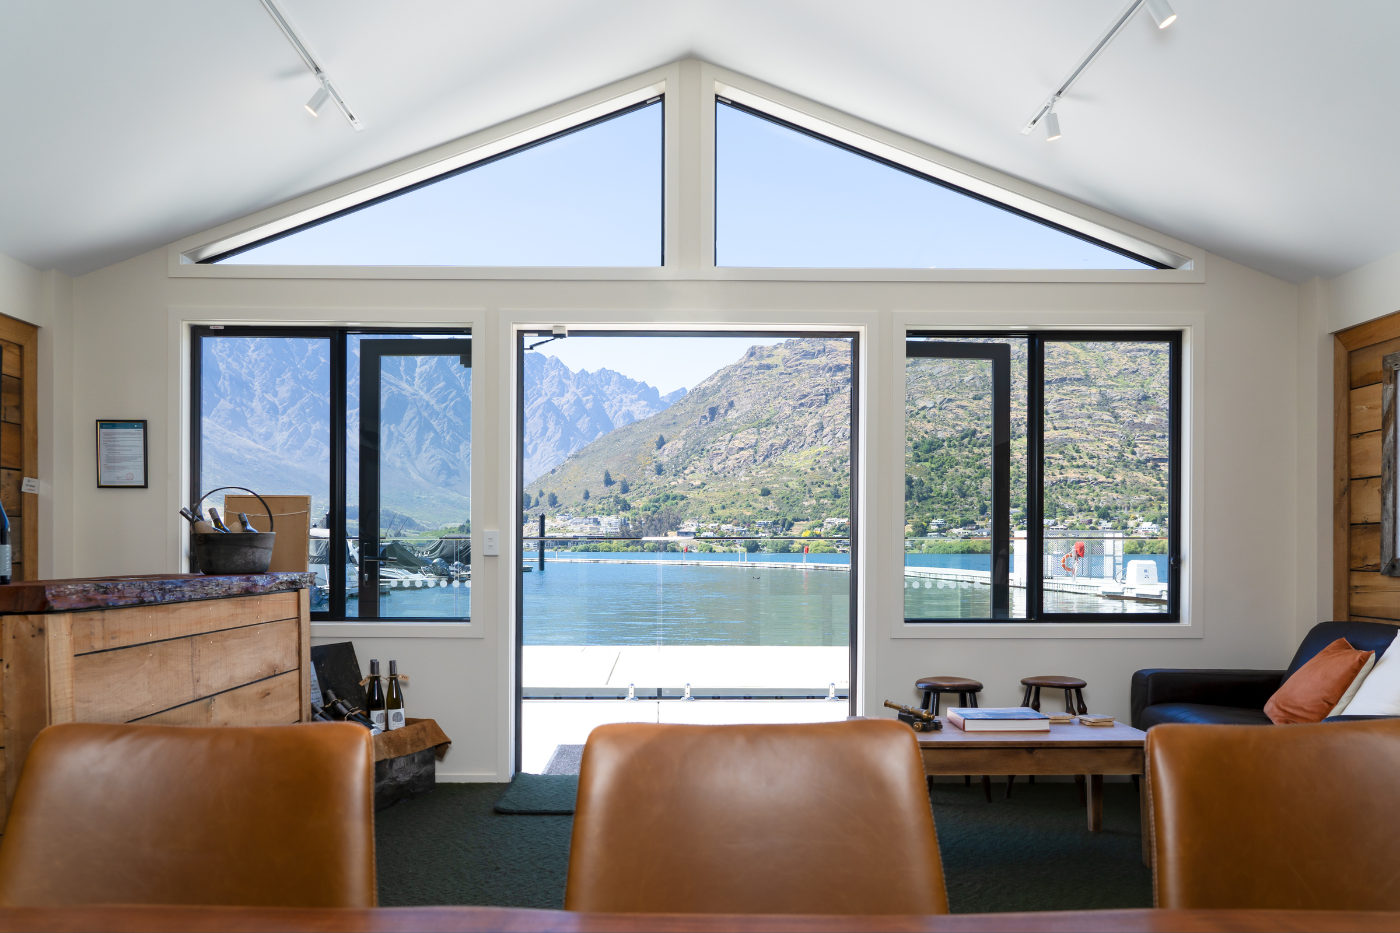 View of Lake Whakatipu from inside the Wet Jacket tasting room at Queenstown Marina